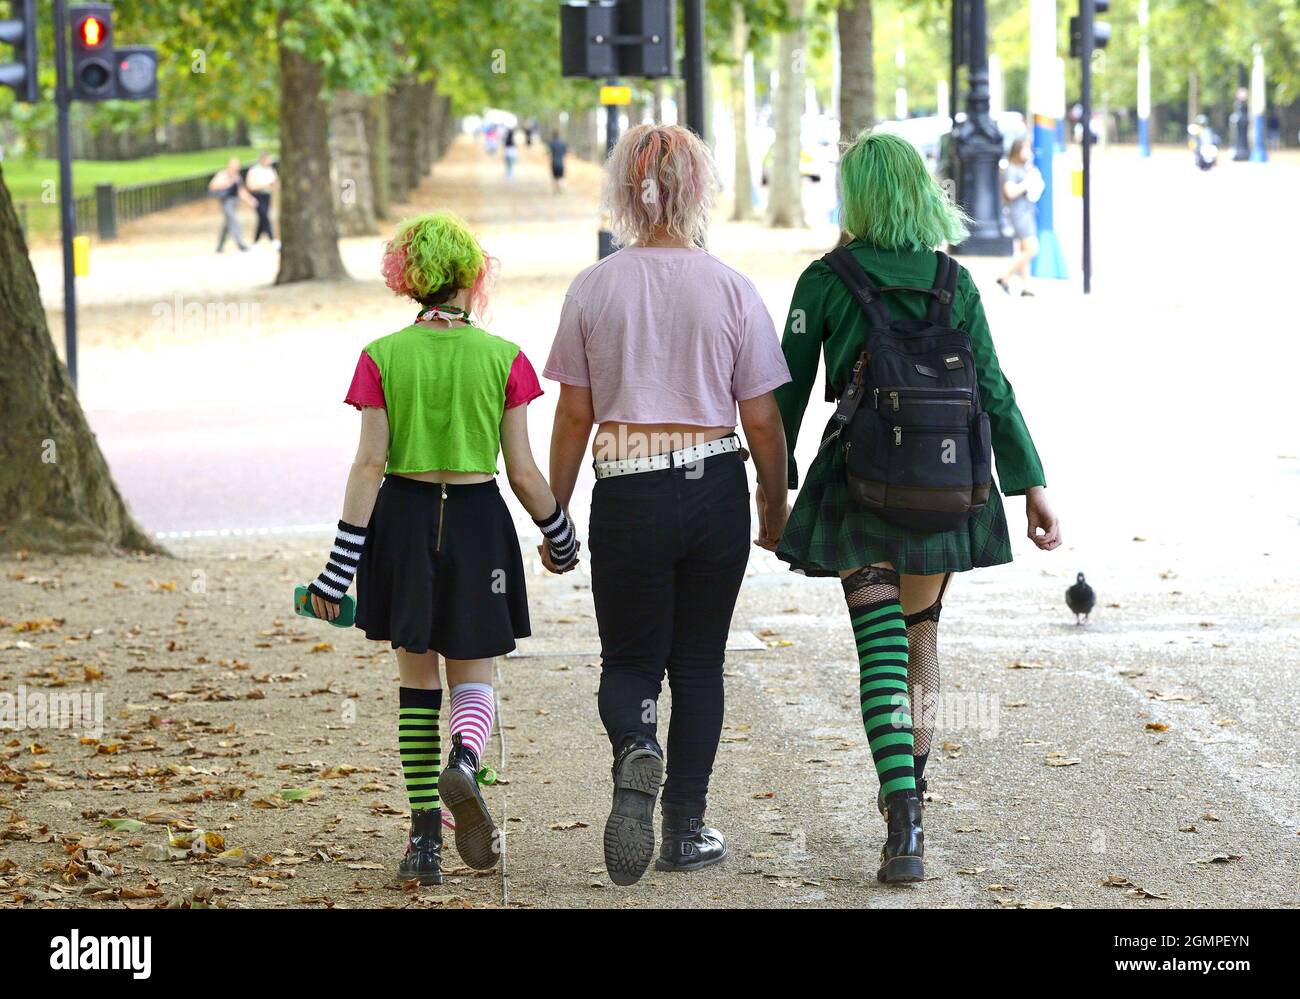 London, England, UK. Young people with colourful clothes and hair in The Mall Stock Photo